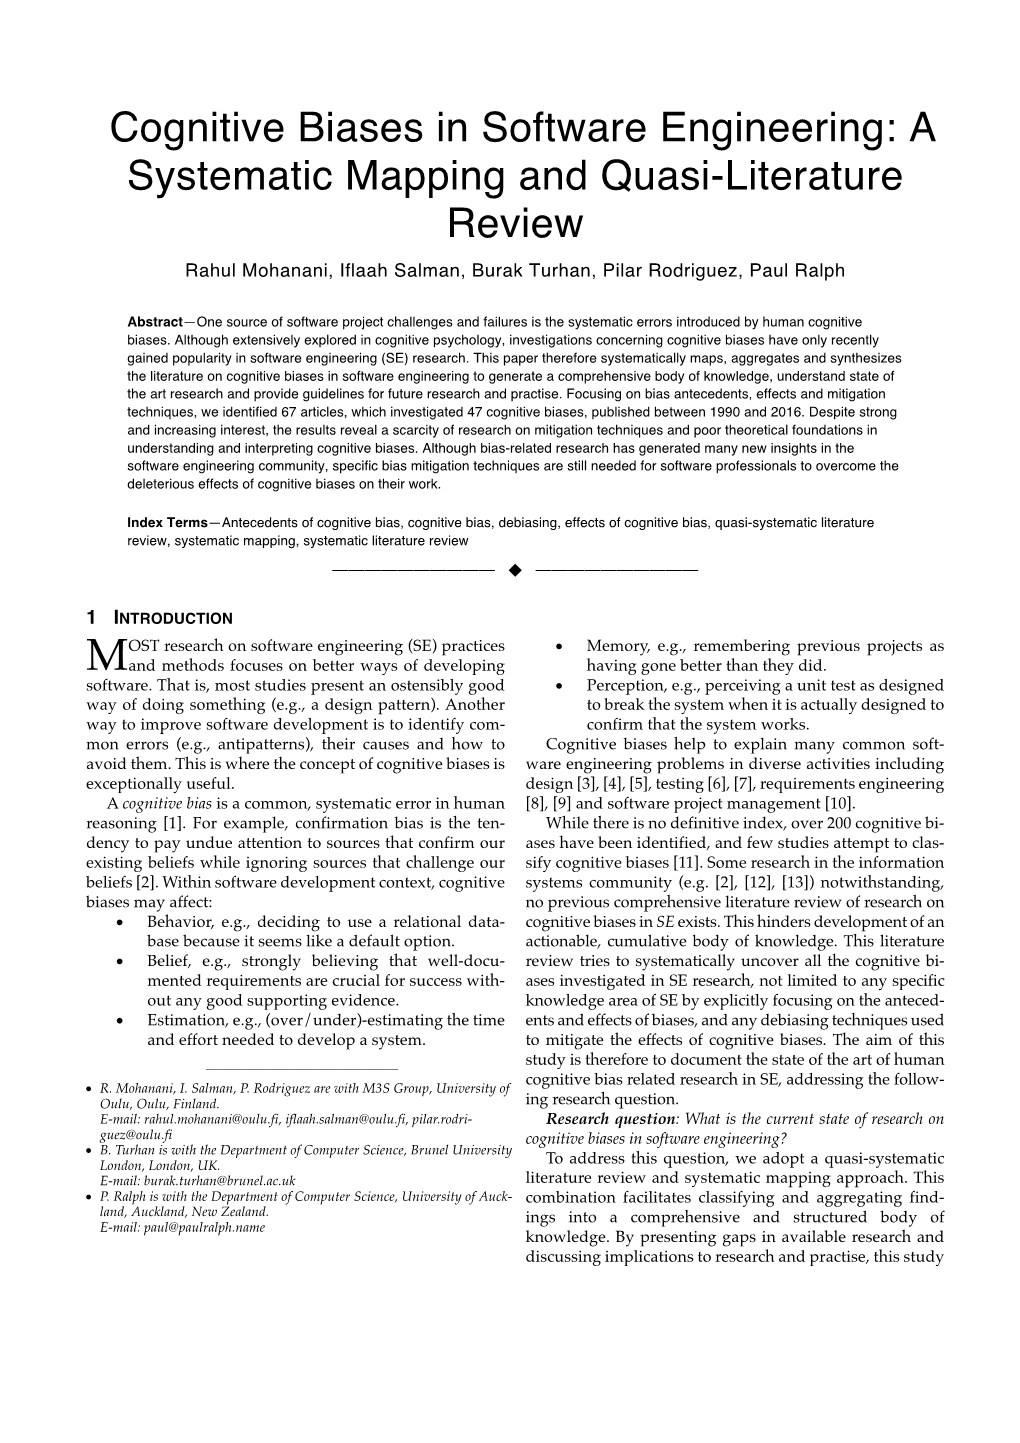 Cognitive Biases in Software Engineering: a Systematic Mapping and Quasi-Literature Review Rahul Mohanani, Iflaah Salman, Burak Turhan, Pilar Rodriguez, Paul Ralph